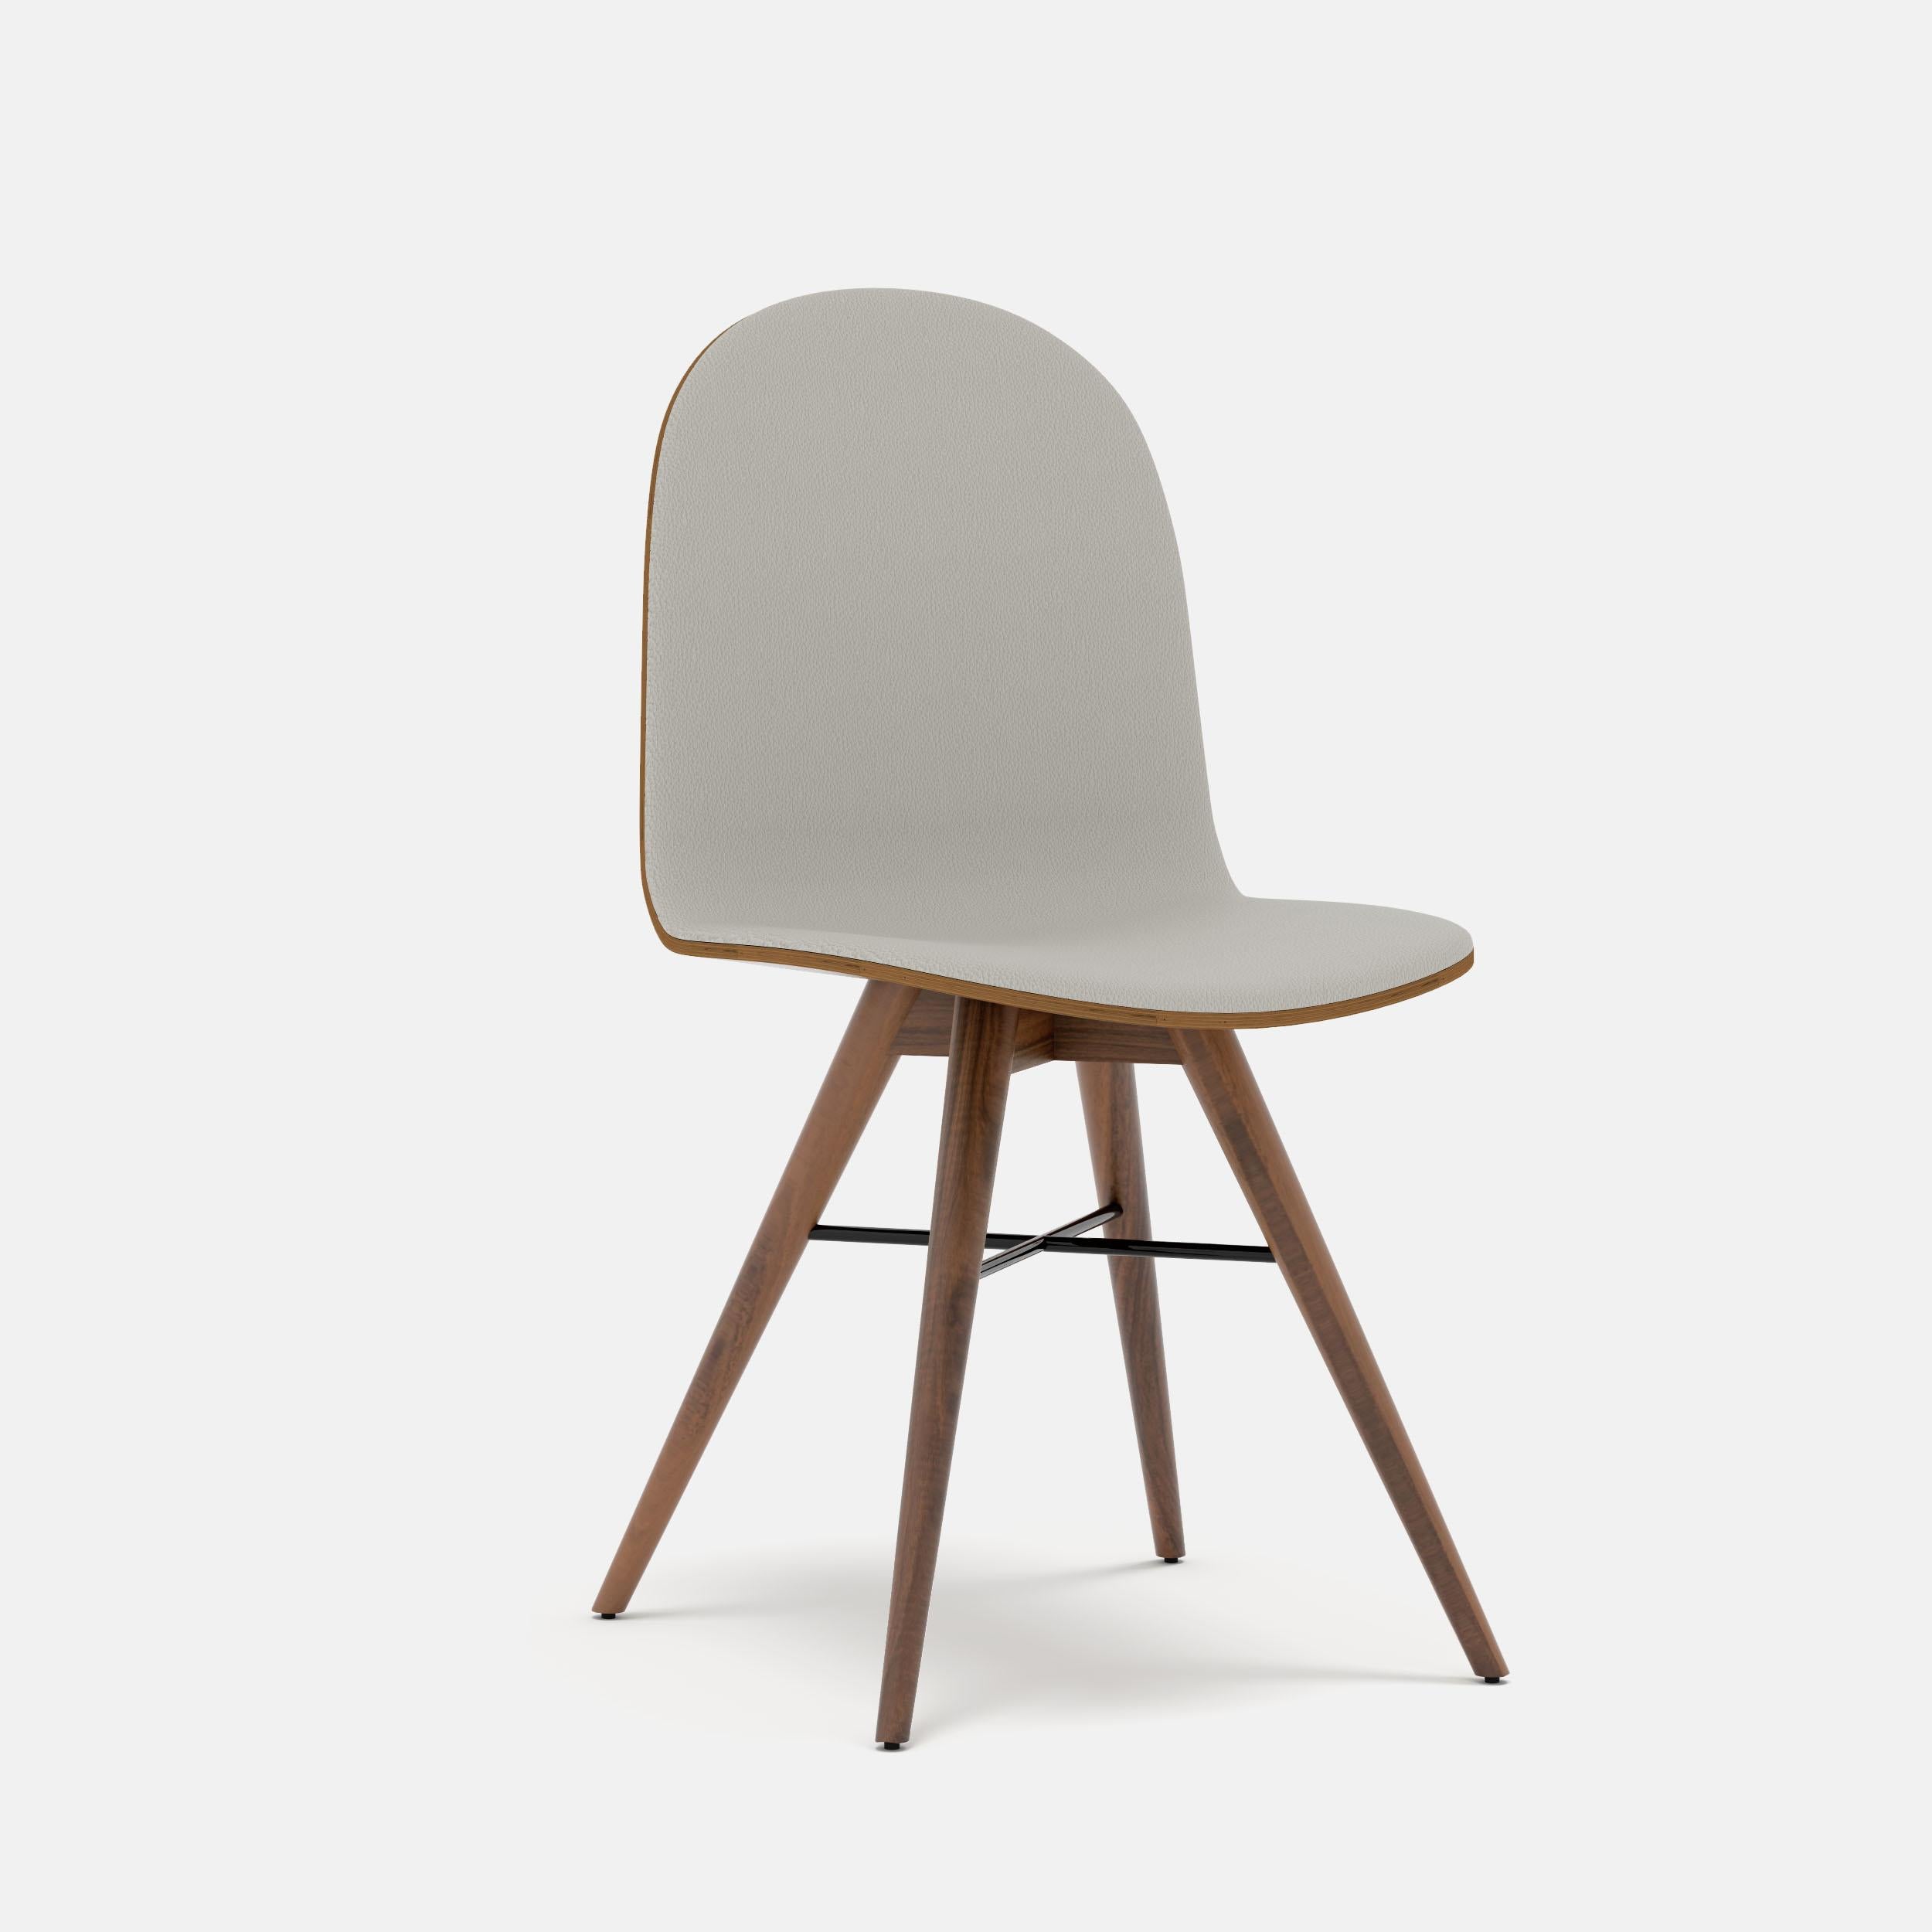 Solid American walnut contemporary chair by Alexandre Caldas
Dimensions: W 40 x D 40 x H 80 cm
Materials: American walnut 100% solid wood, fabric

Structure available in beech, ash, oak, mix wood
Seat available in fabric, leather, cork